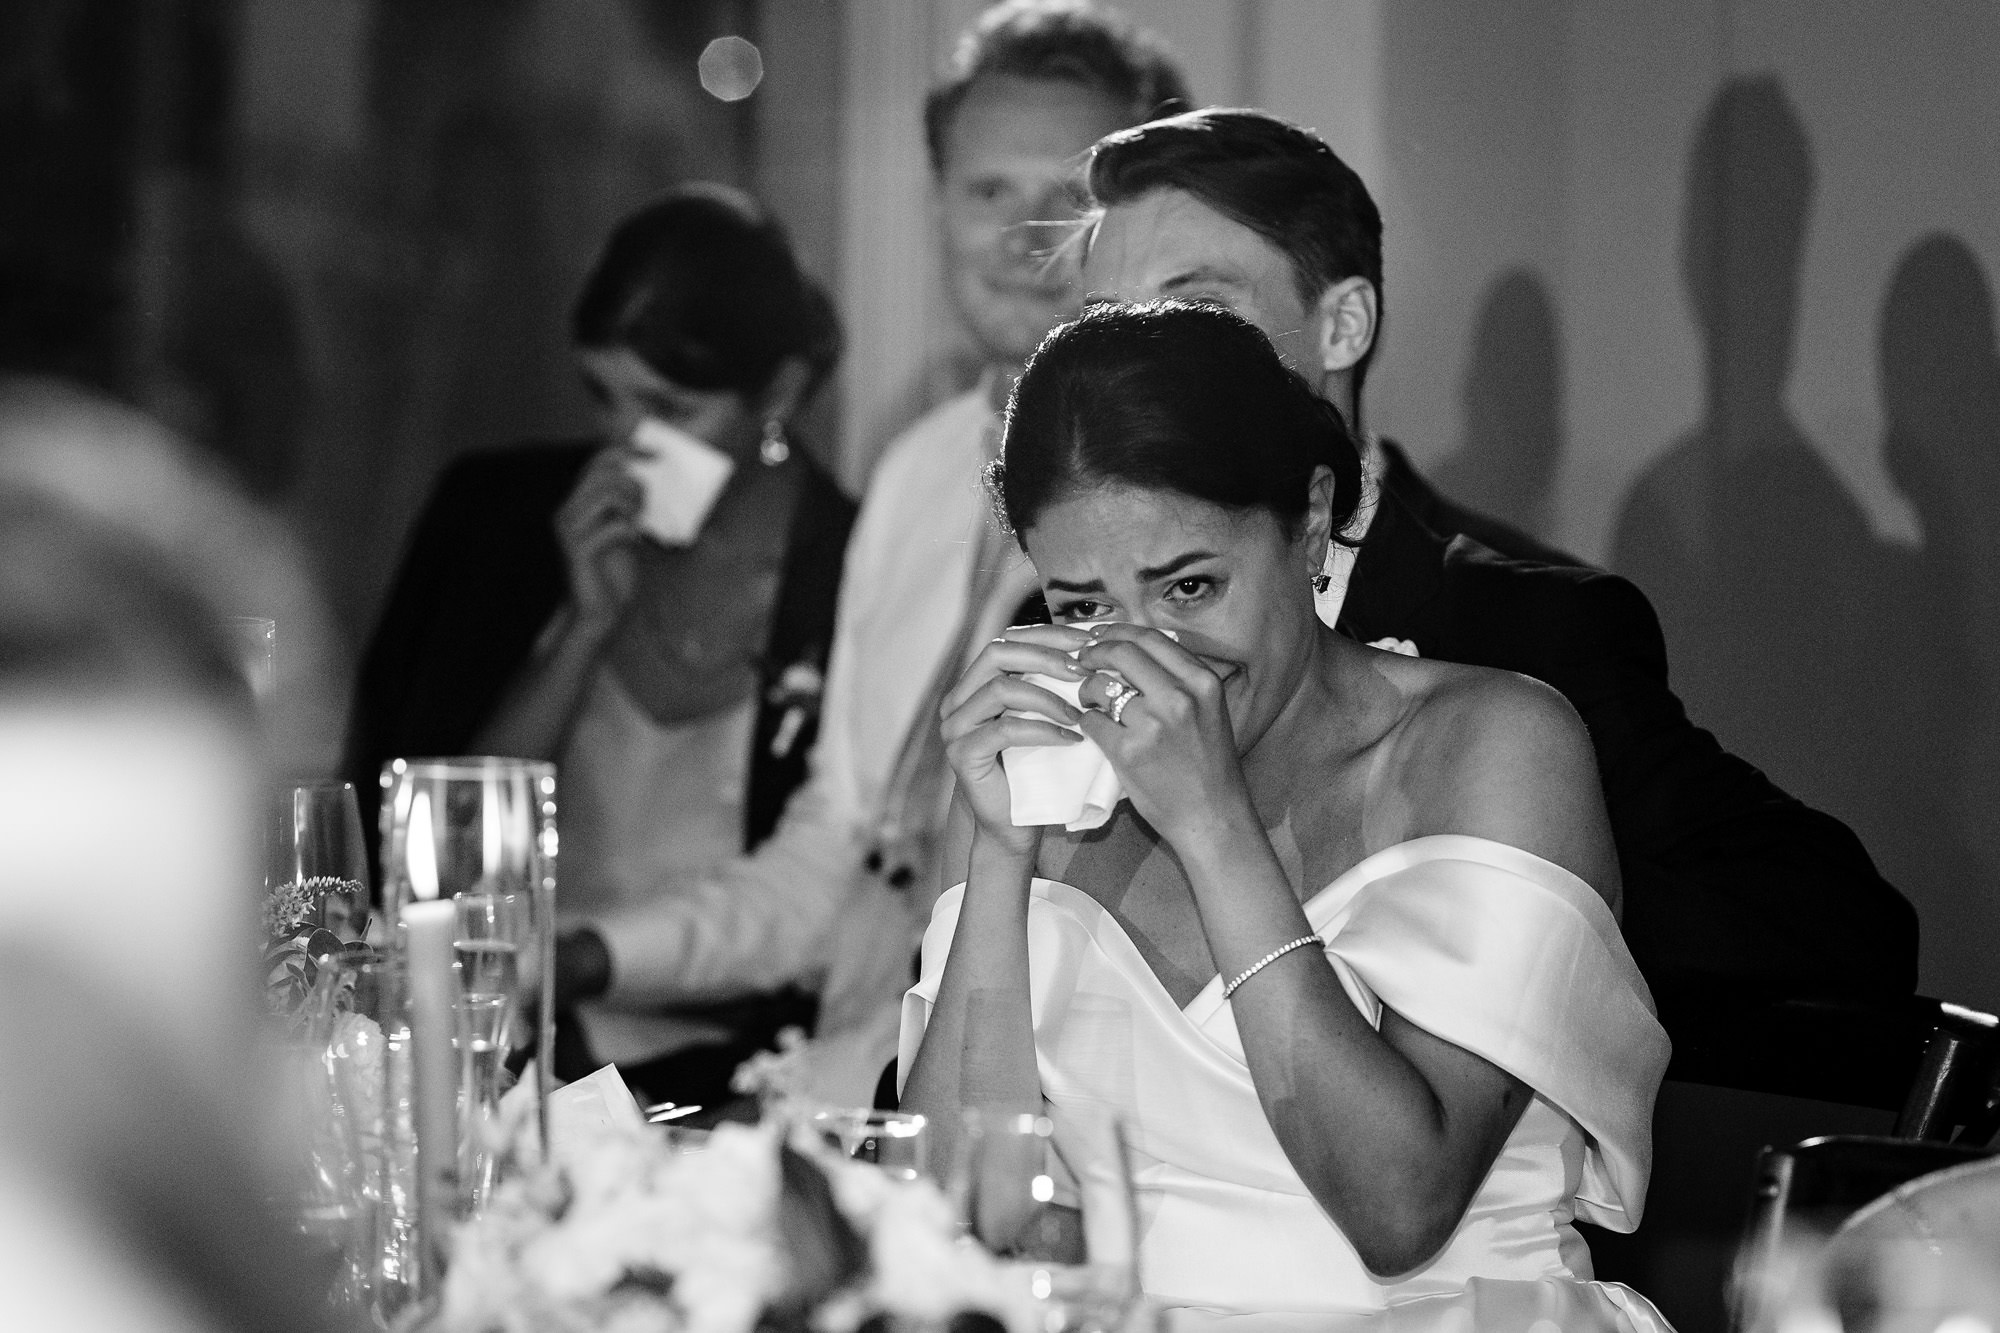 The bride cries during a toast by her maid of honor at their Kittery Point Maine wedding